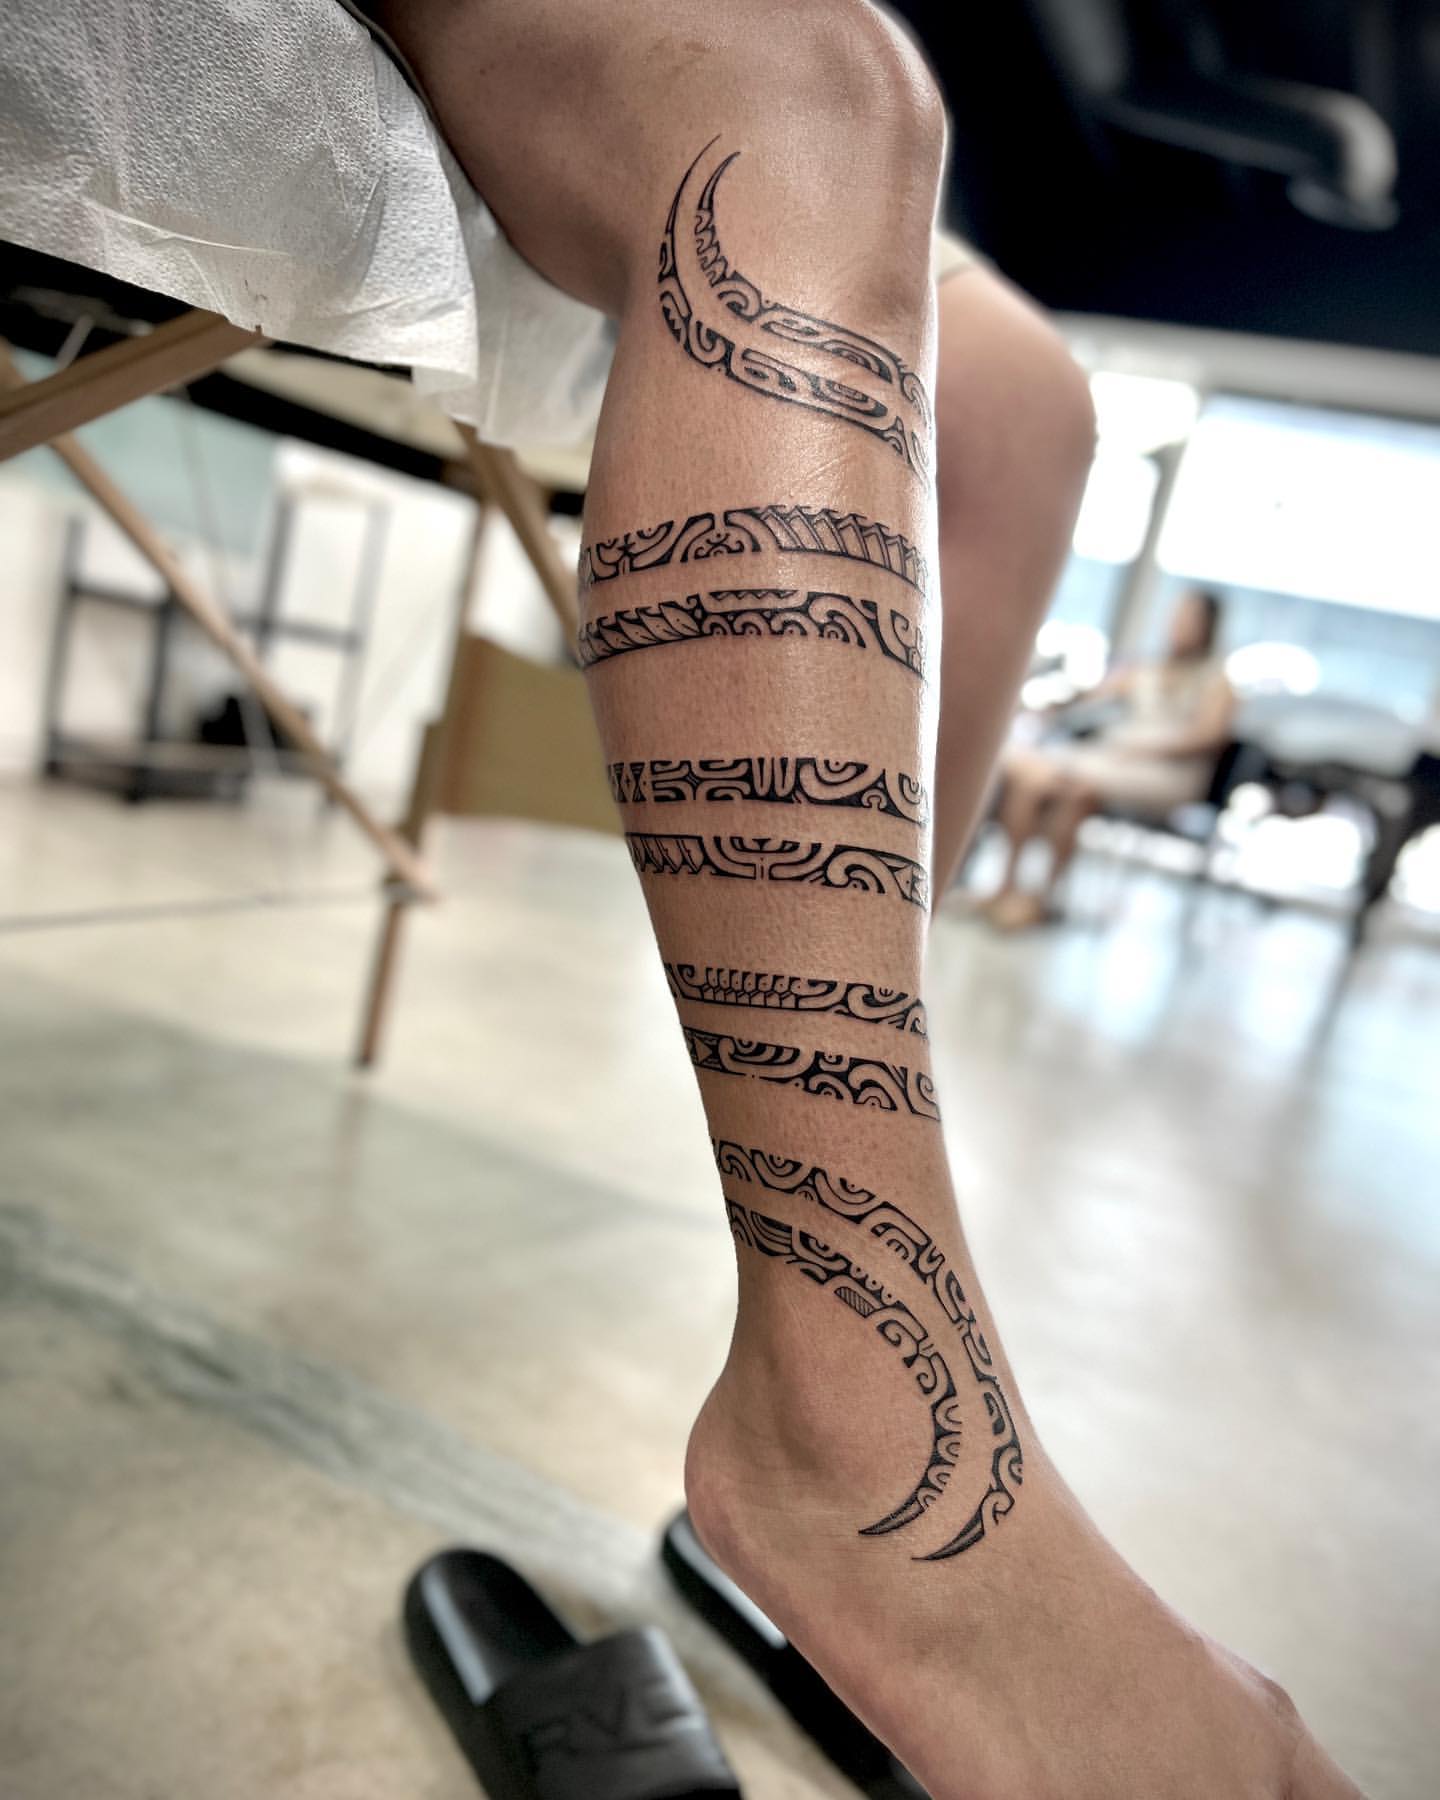 15 Tattoo ideas for legs that are classy and cool